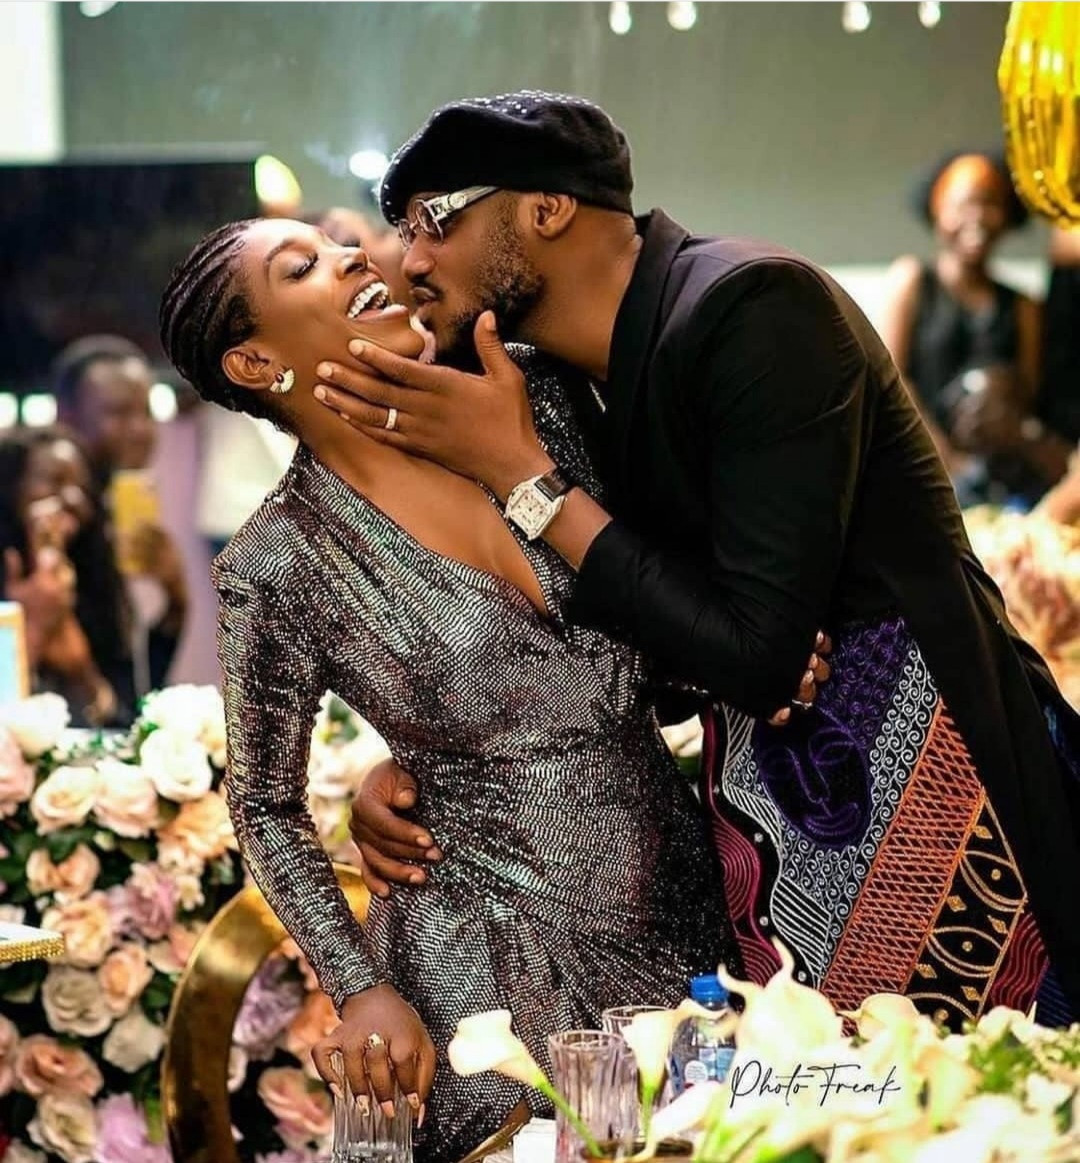 Enjoy my kids and have sex with my bobo - Annie Idibia lists her goals